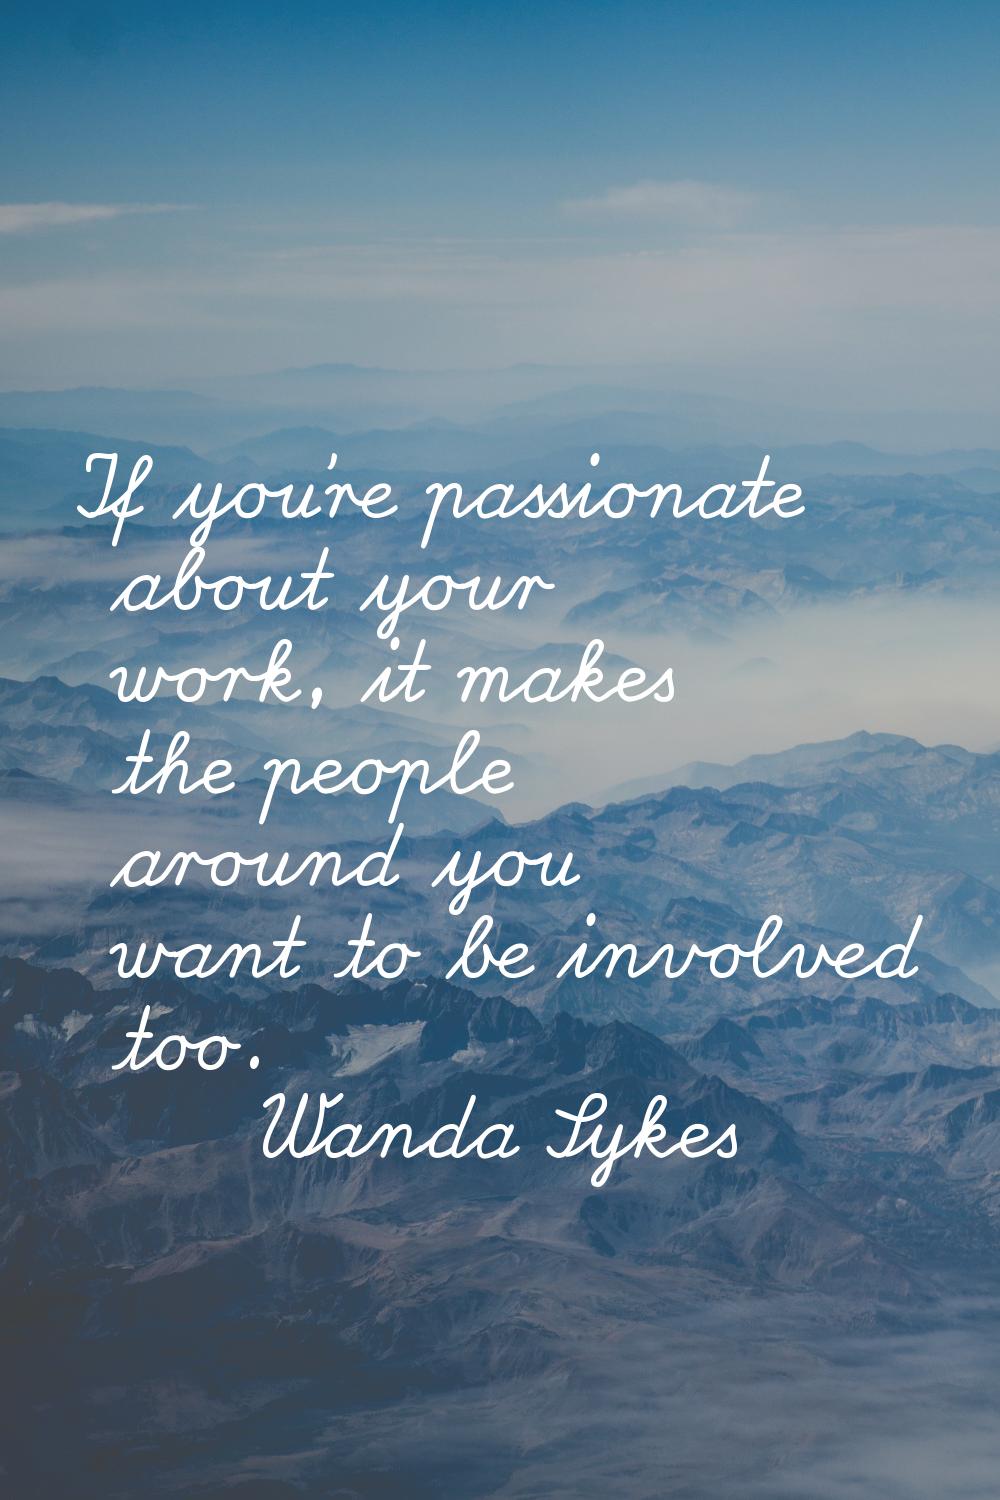 If you're passionate about your work, it makes the people around you want to be involved too.